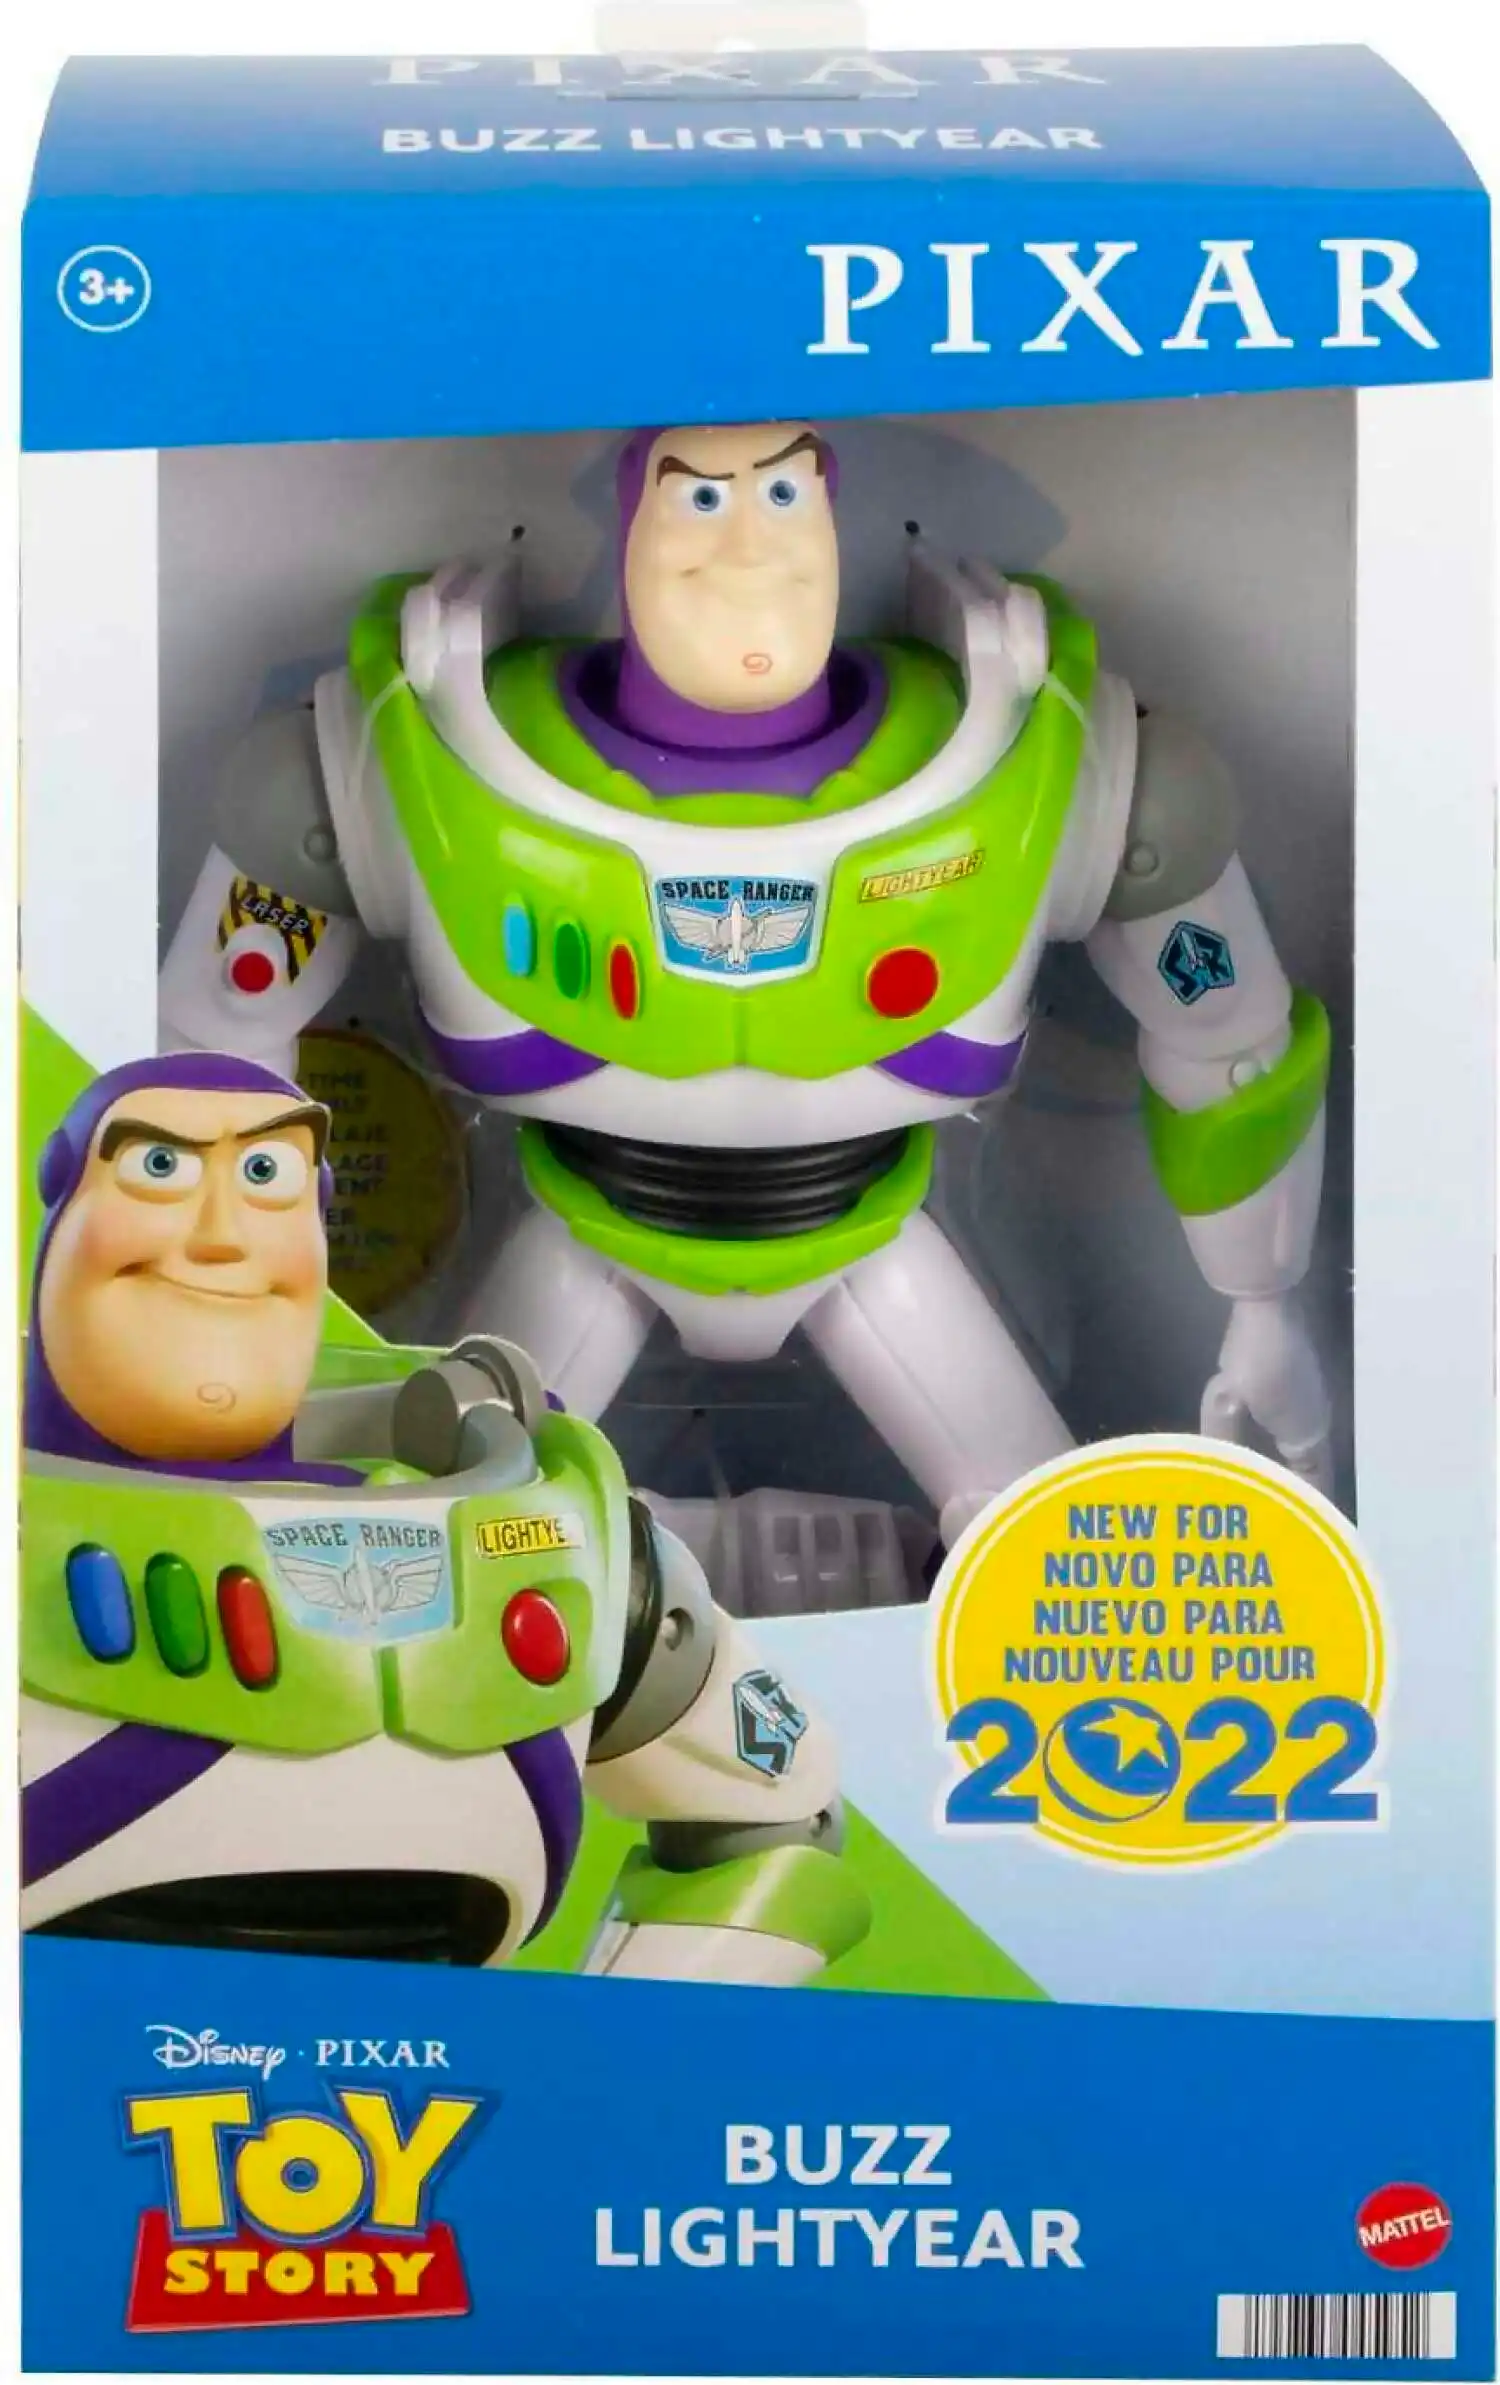 Disney Pixar - Toy Story Large Buzz Lightyear Action Figure Collectible Toy In 12-inch Scale